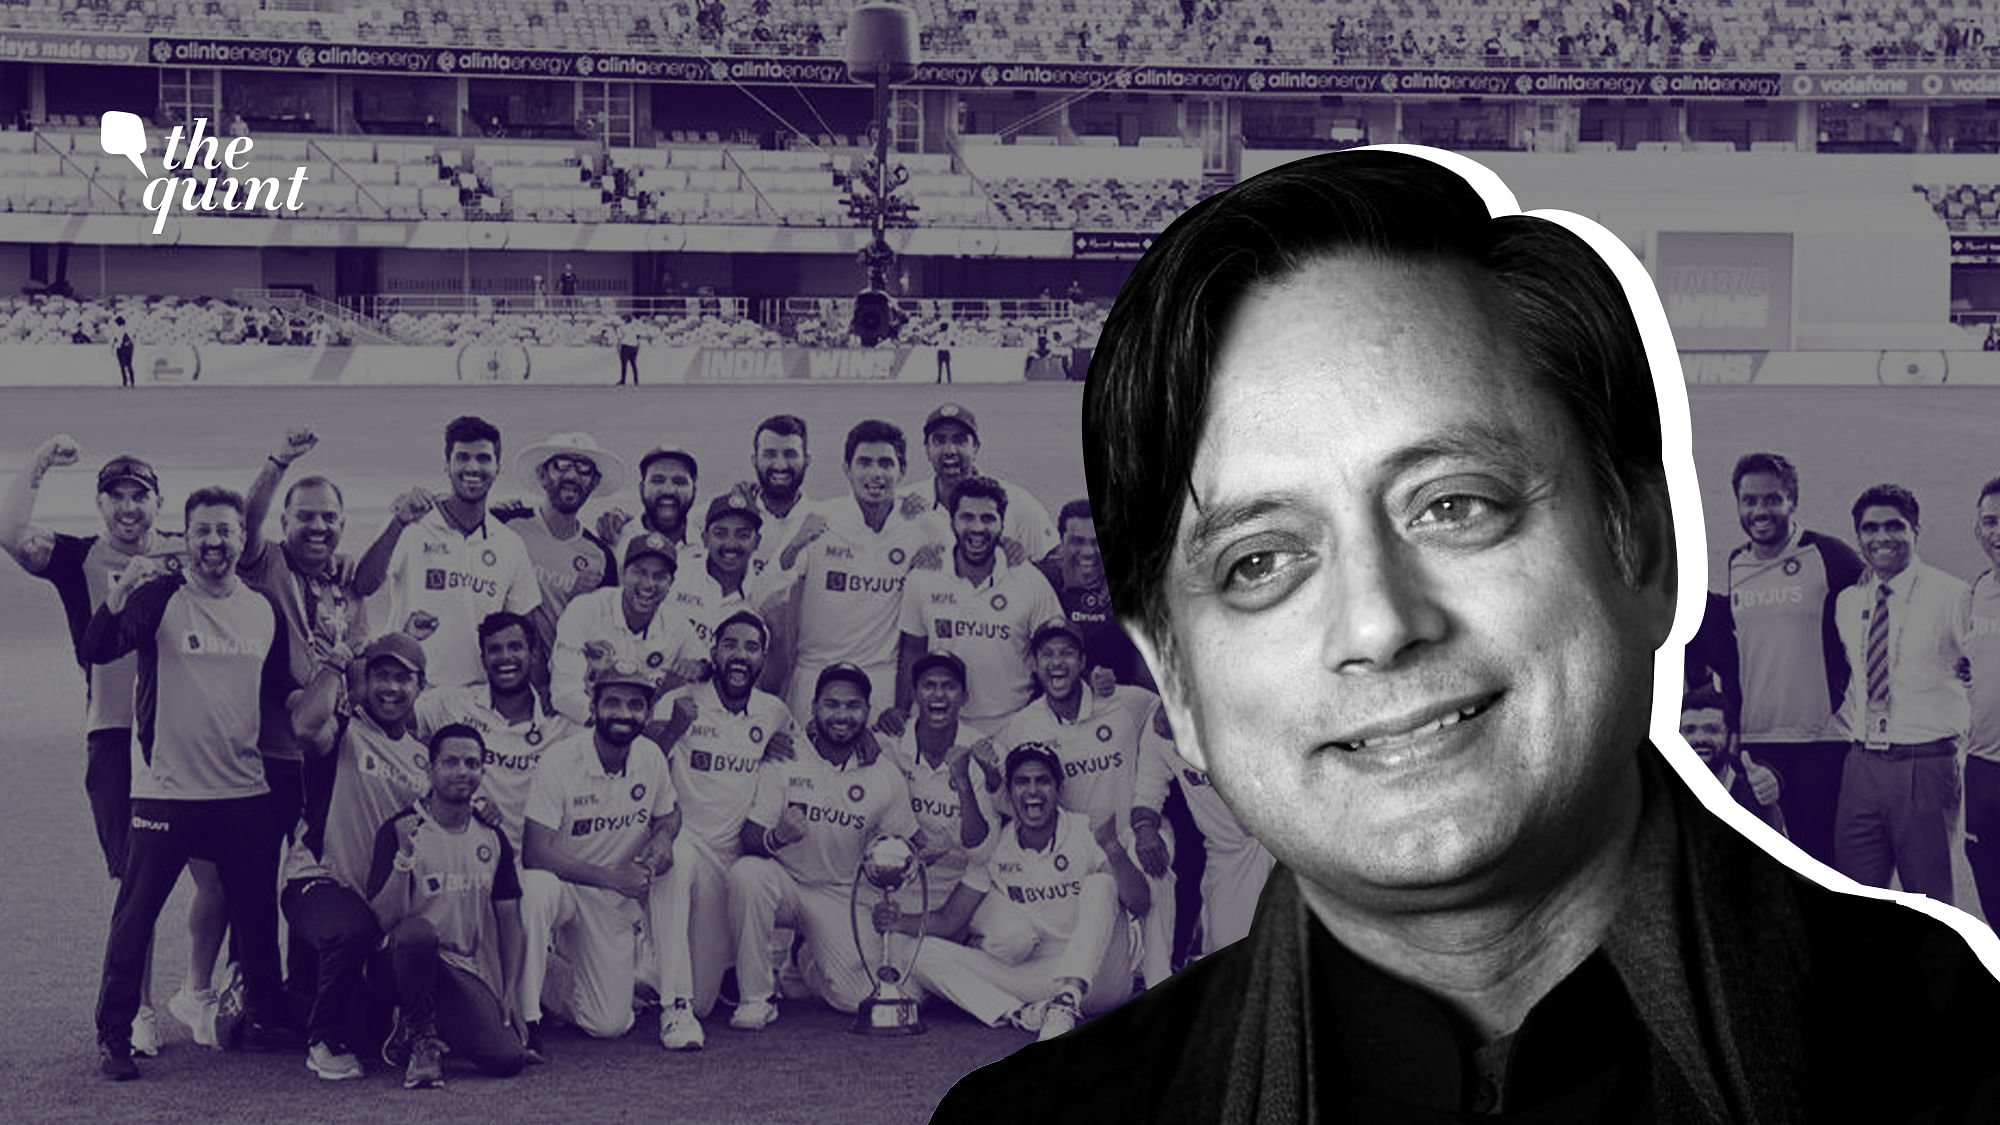 Image of Dr Shashi Tharoor, and the victorious Indian cricket team at The Gabba, Brisbane, Australia, in the background, used for representational purposes.